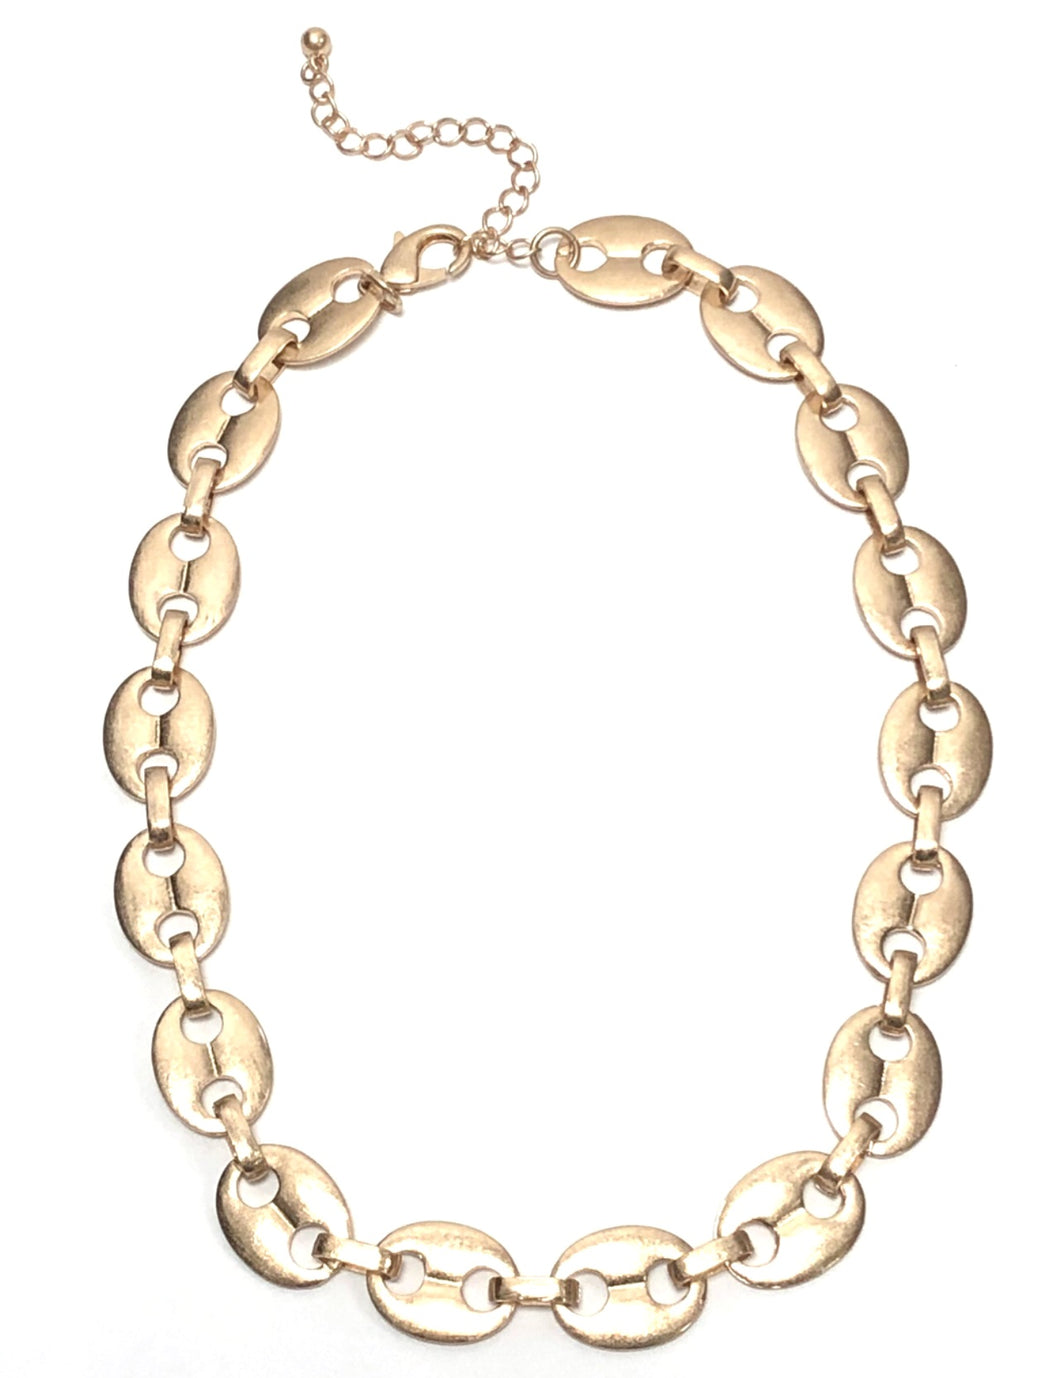 Brushed Gold Oval Link Chain Necklace